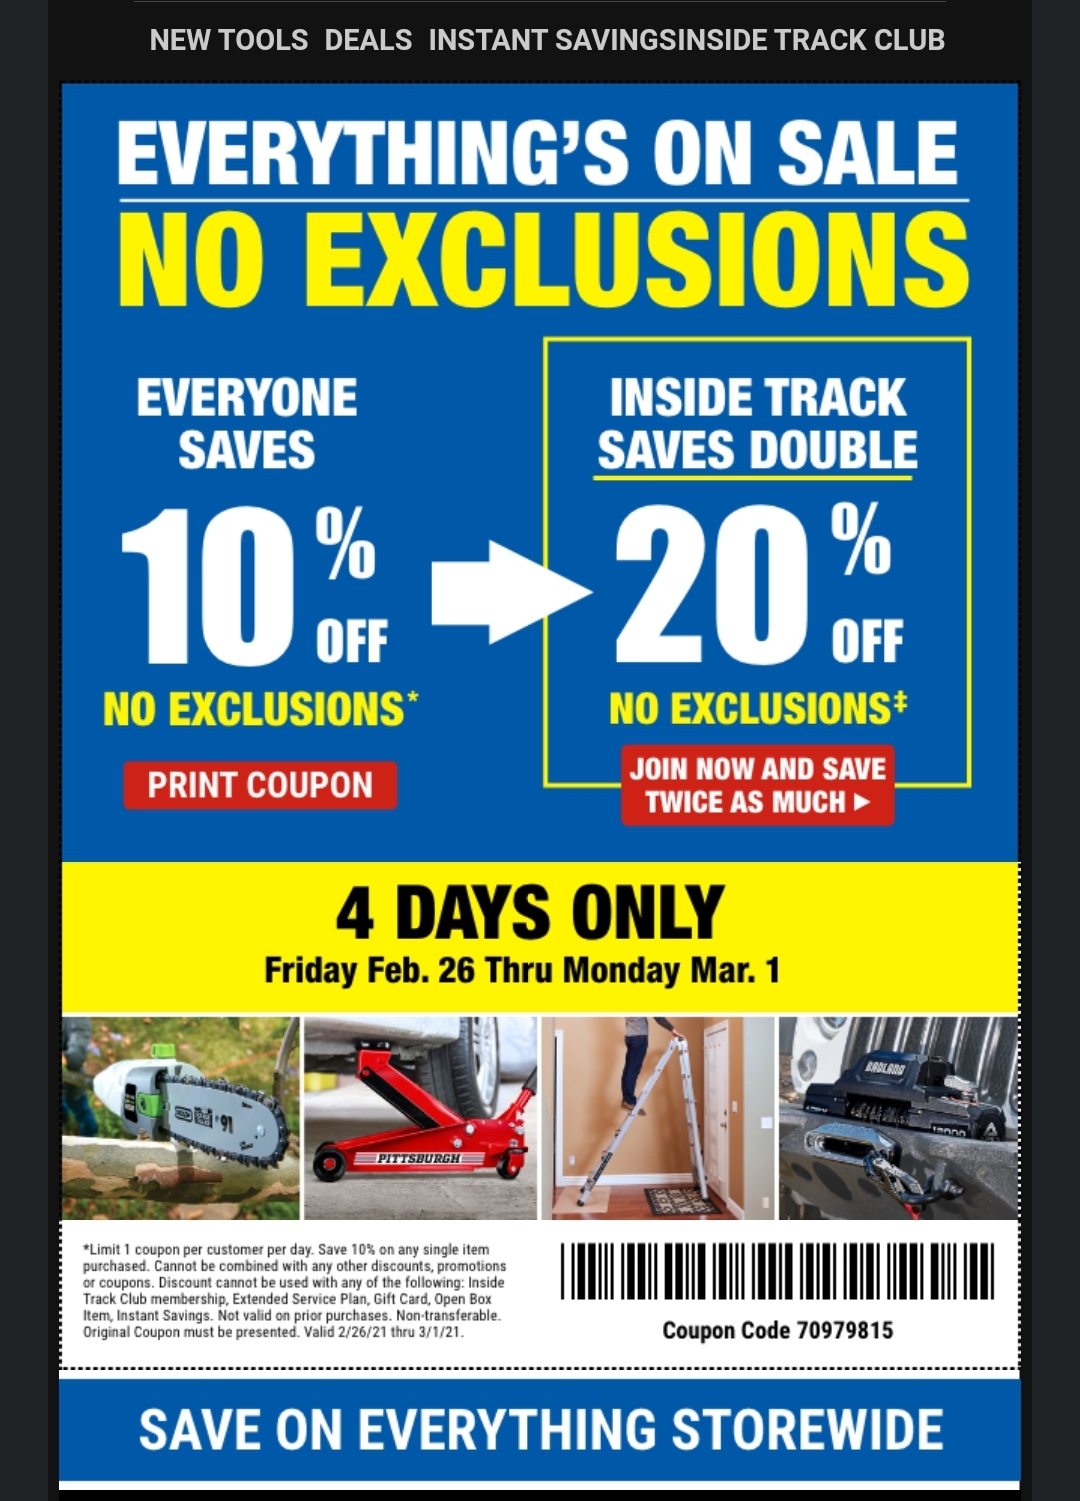 Harbor Freight Tools Coupon Database Free coupons, percent off